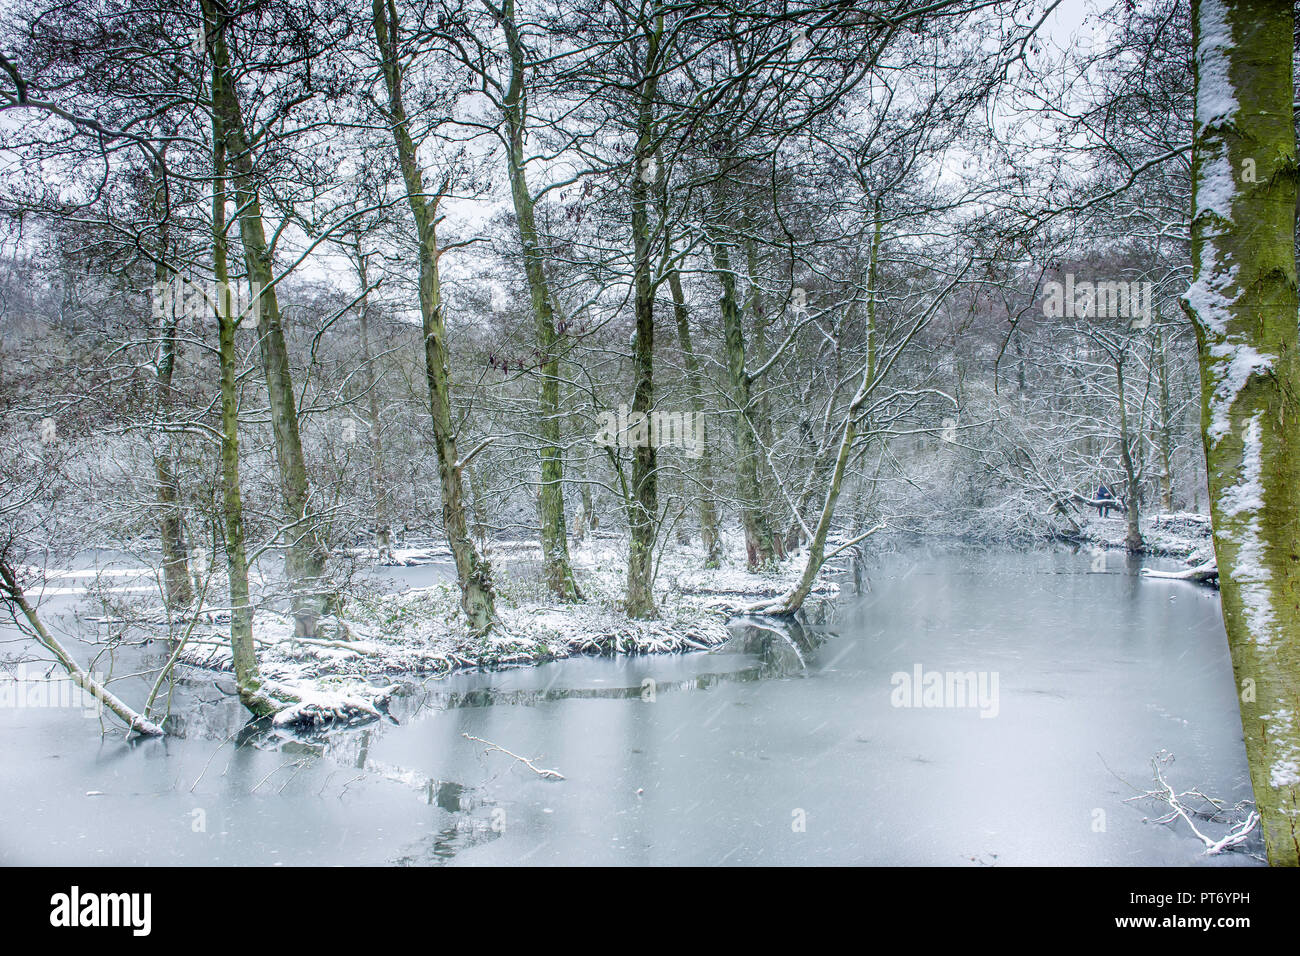 Winter wonderland scenery.Frozen lake in british woodland and falling snow.Ice covering pond surface in wilderness.Snowy forest landscape.Nature uk. Stock Photo